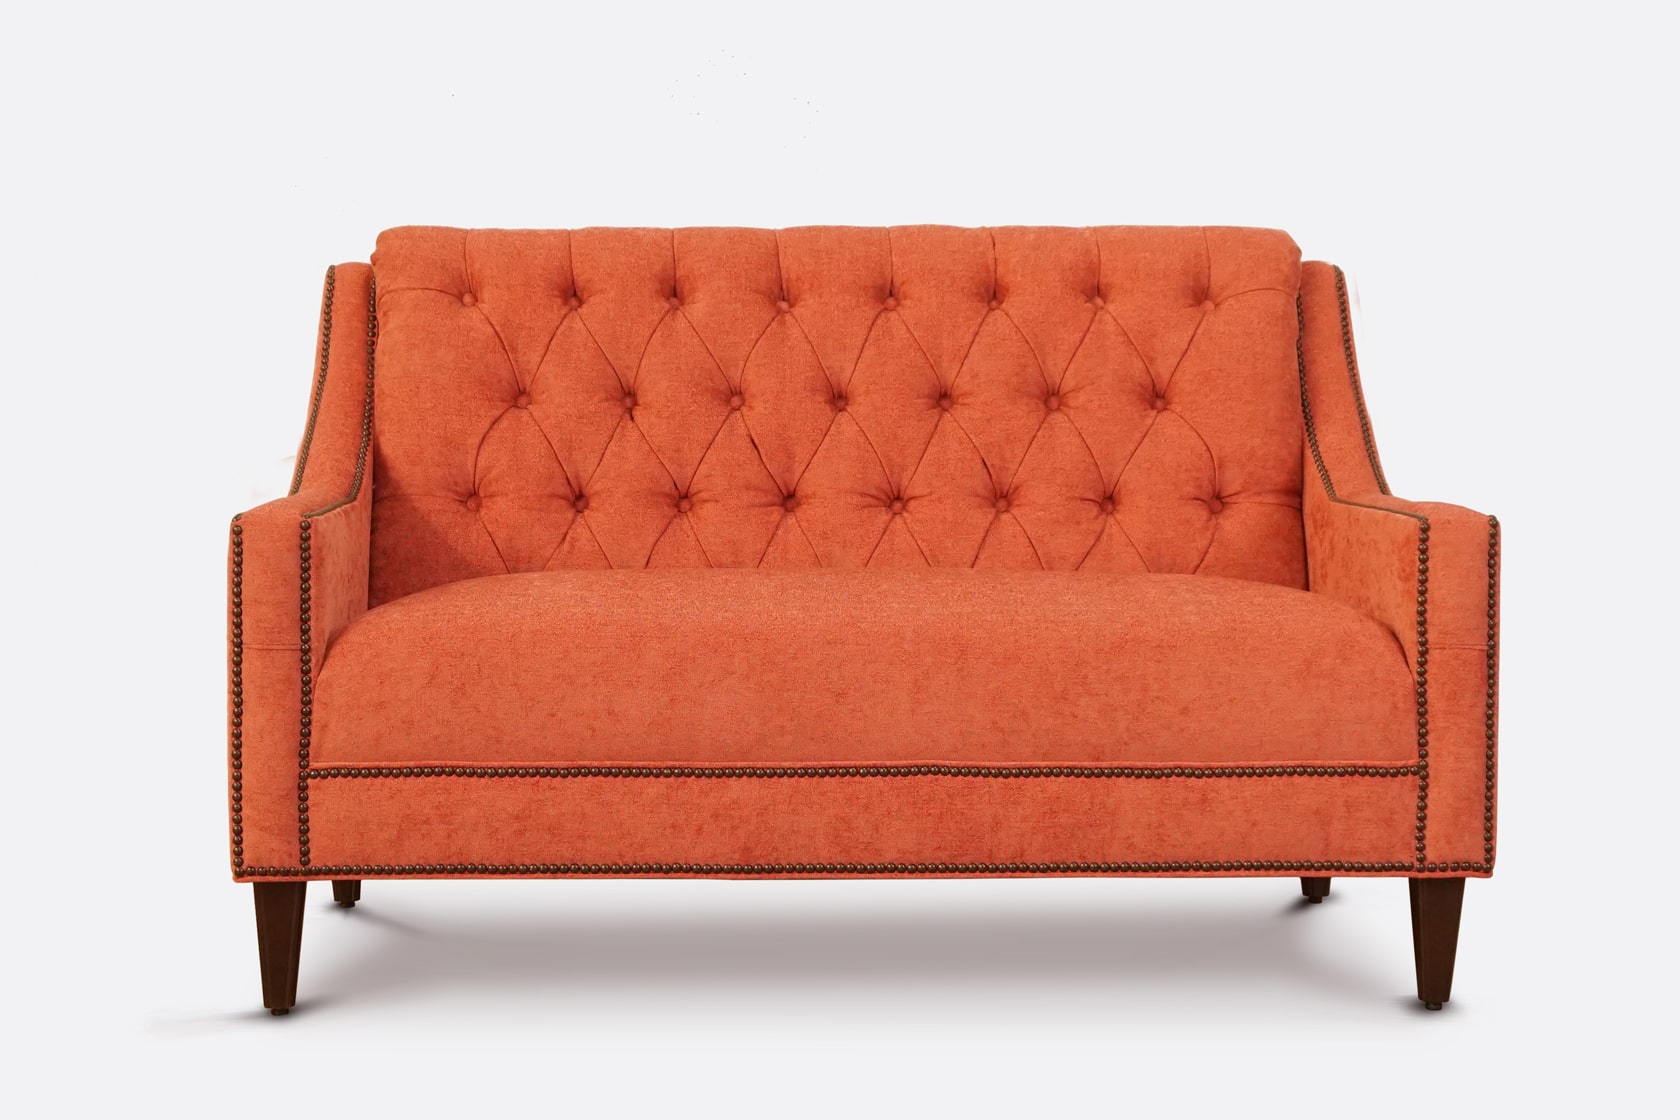 Colwell Slope arm settee shown in Crypton Jessica Blossom